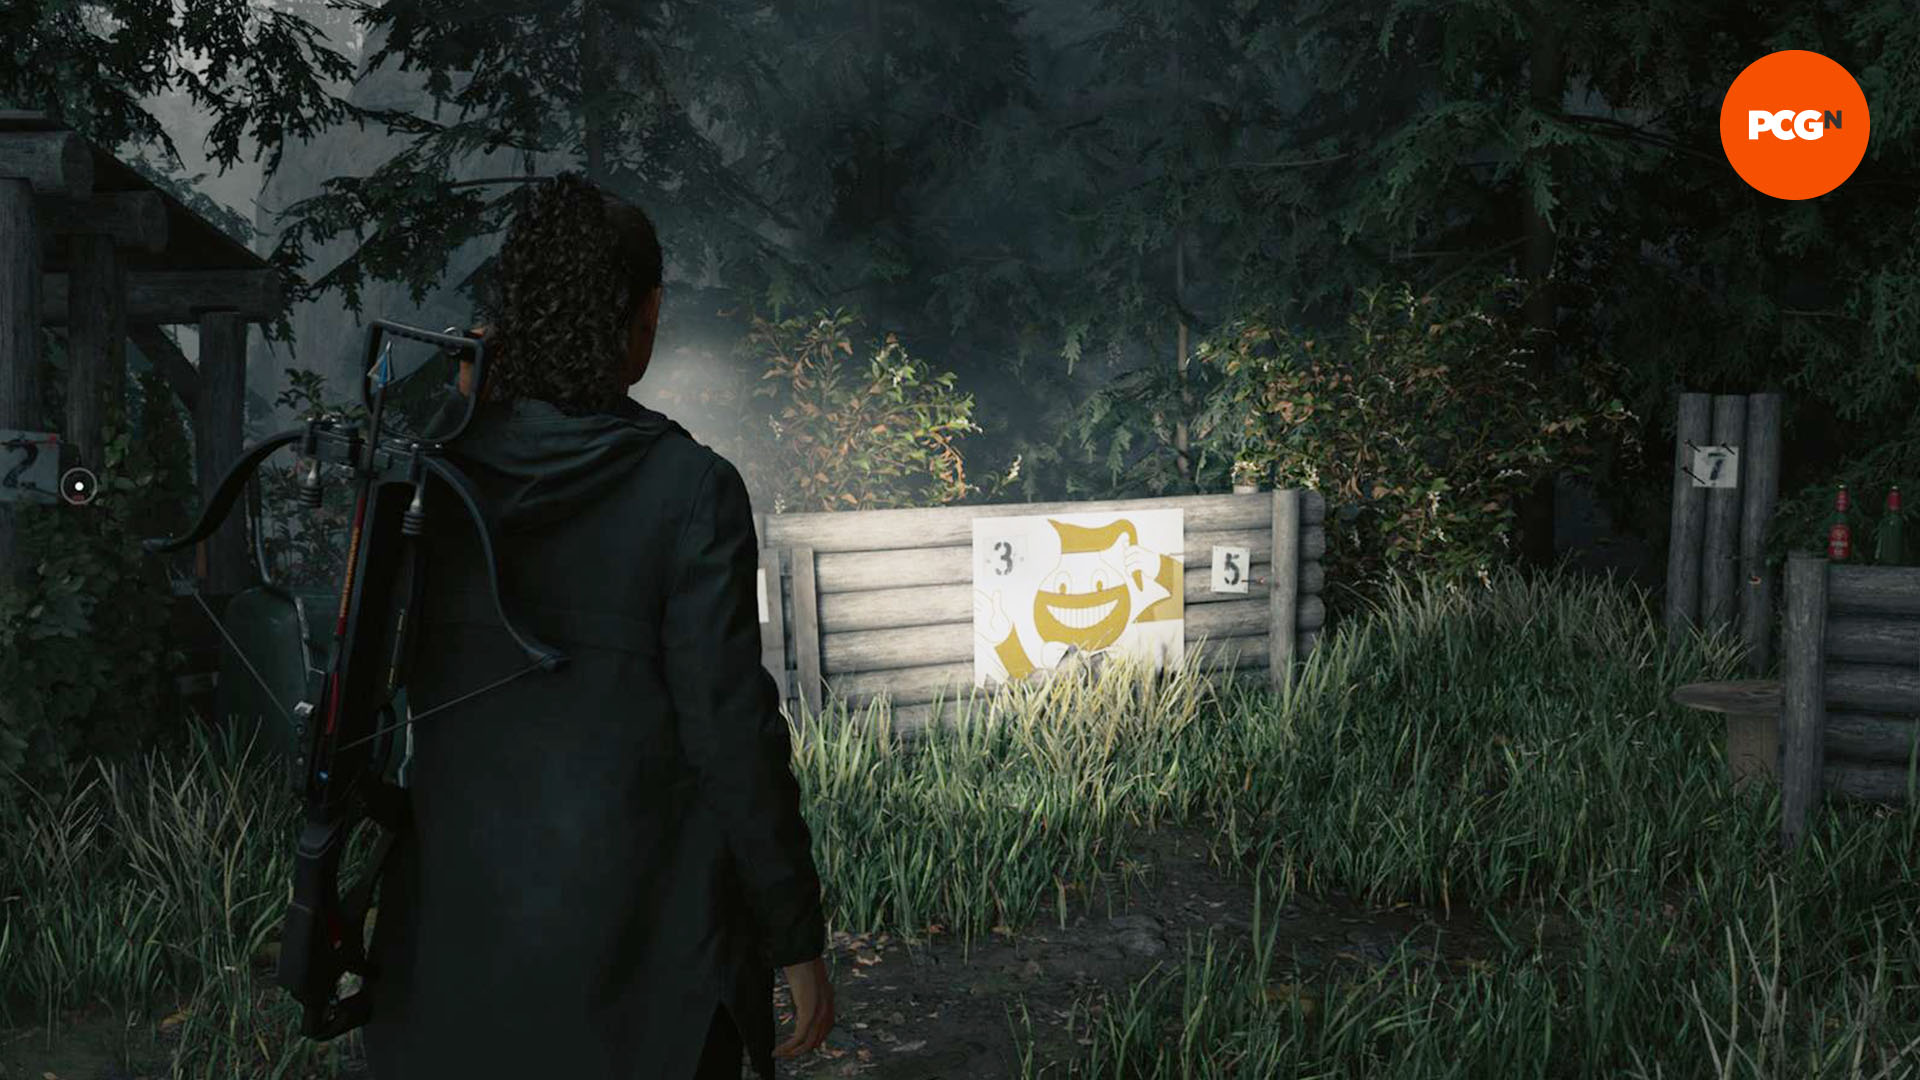 Alan Wake 2 director used fan wikis to help “remember the details”